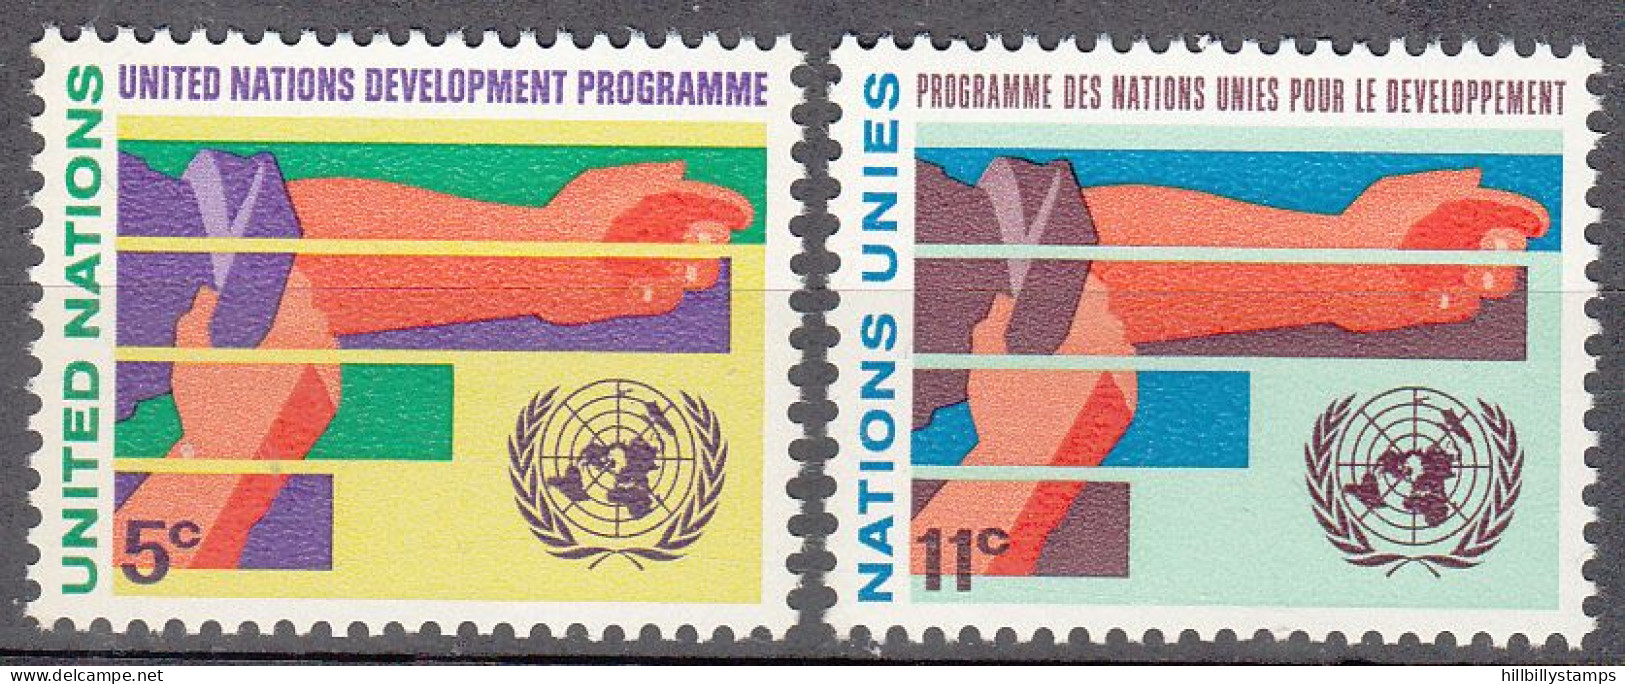 UNITED NATIONS NY   SCOTT NO 164-65   MNH     YEAR  1967 - Unused Stamps